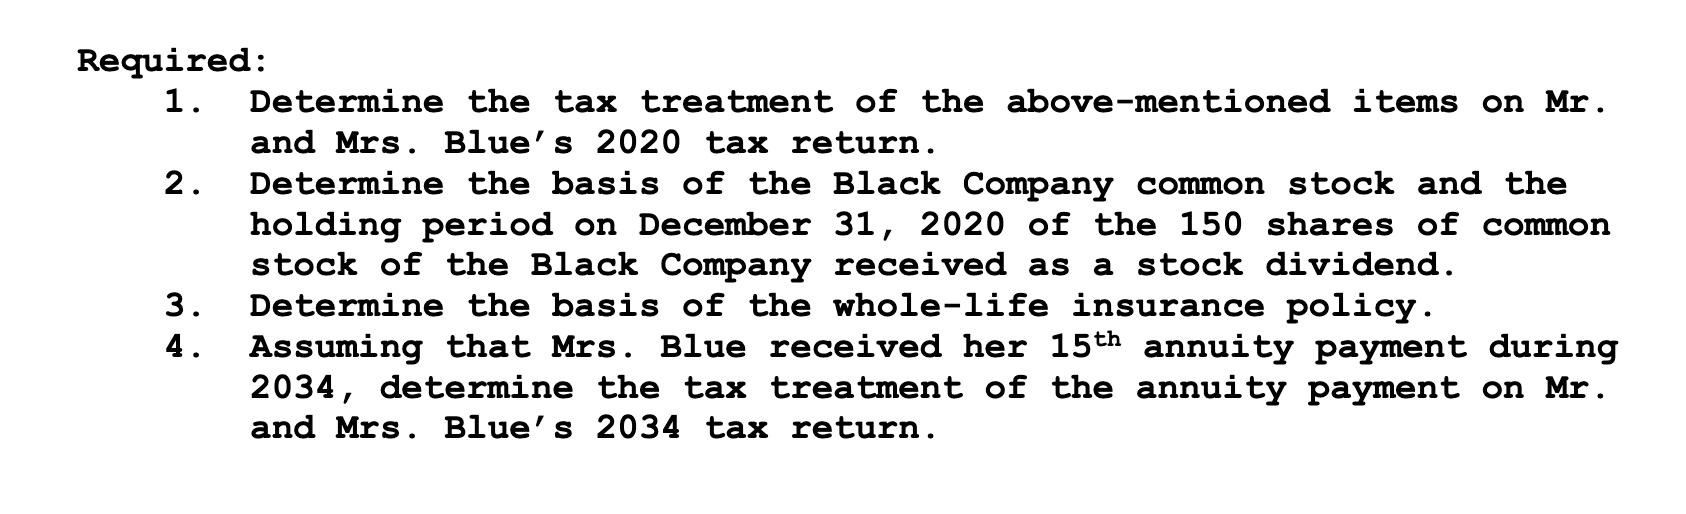 Required: 1. Determine the tax treatment of the above-mentioned items on Mr. and Mrs. Blues 2020 tax return. 2. Determine th